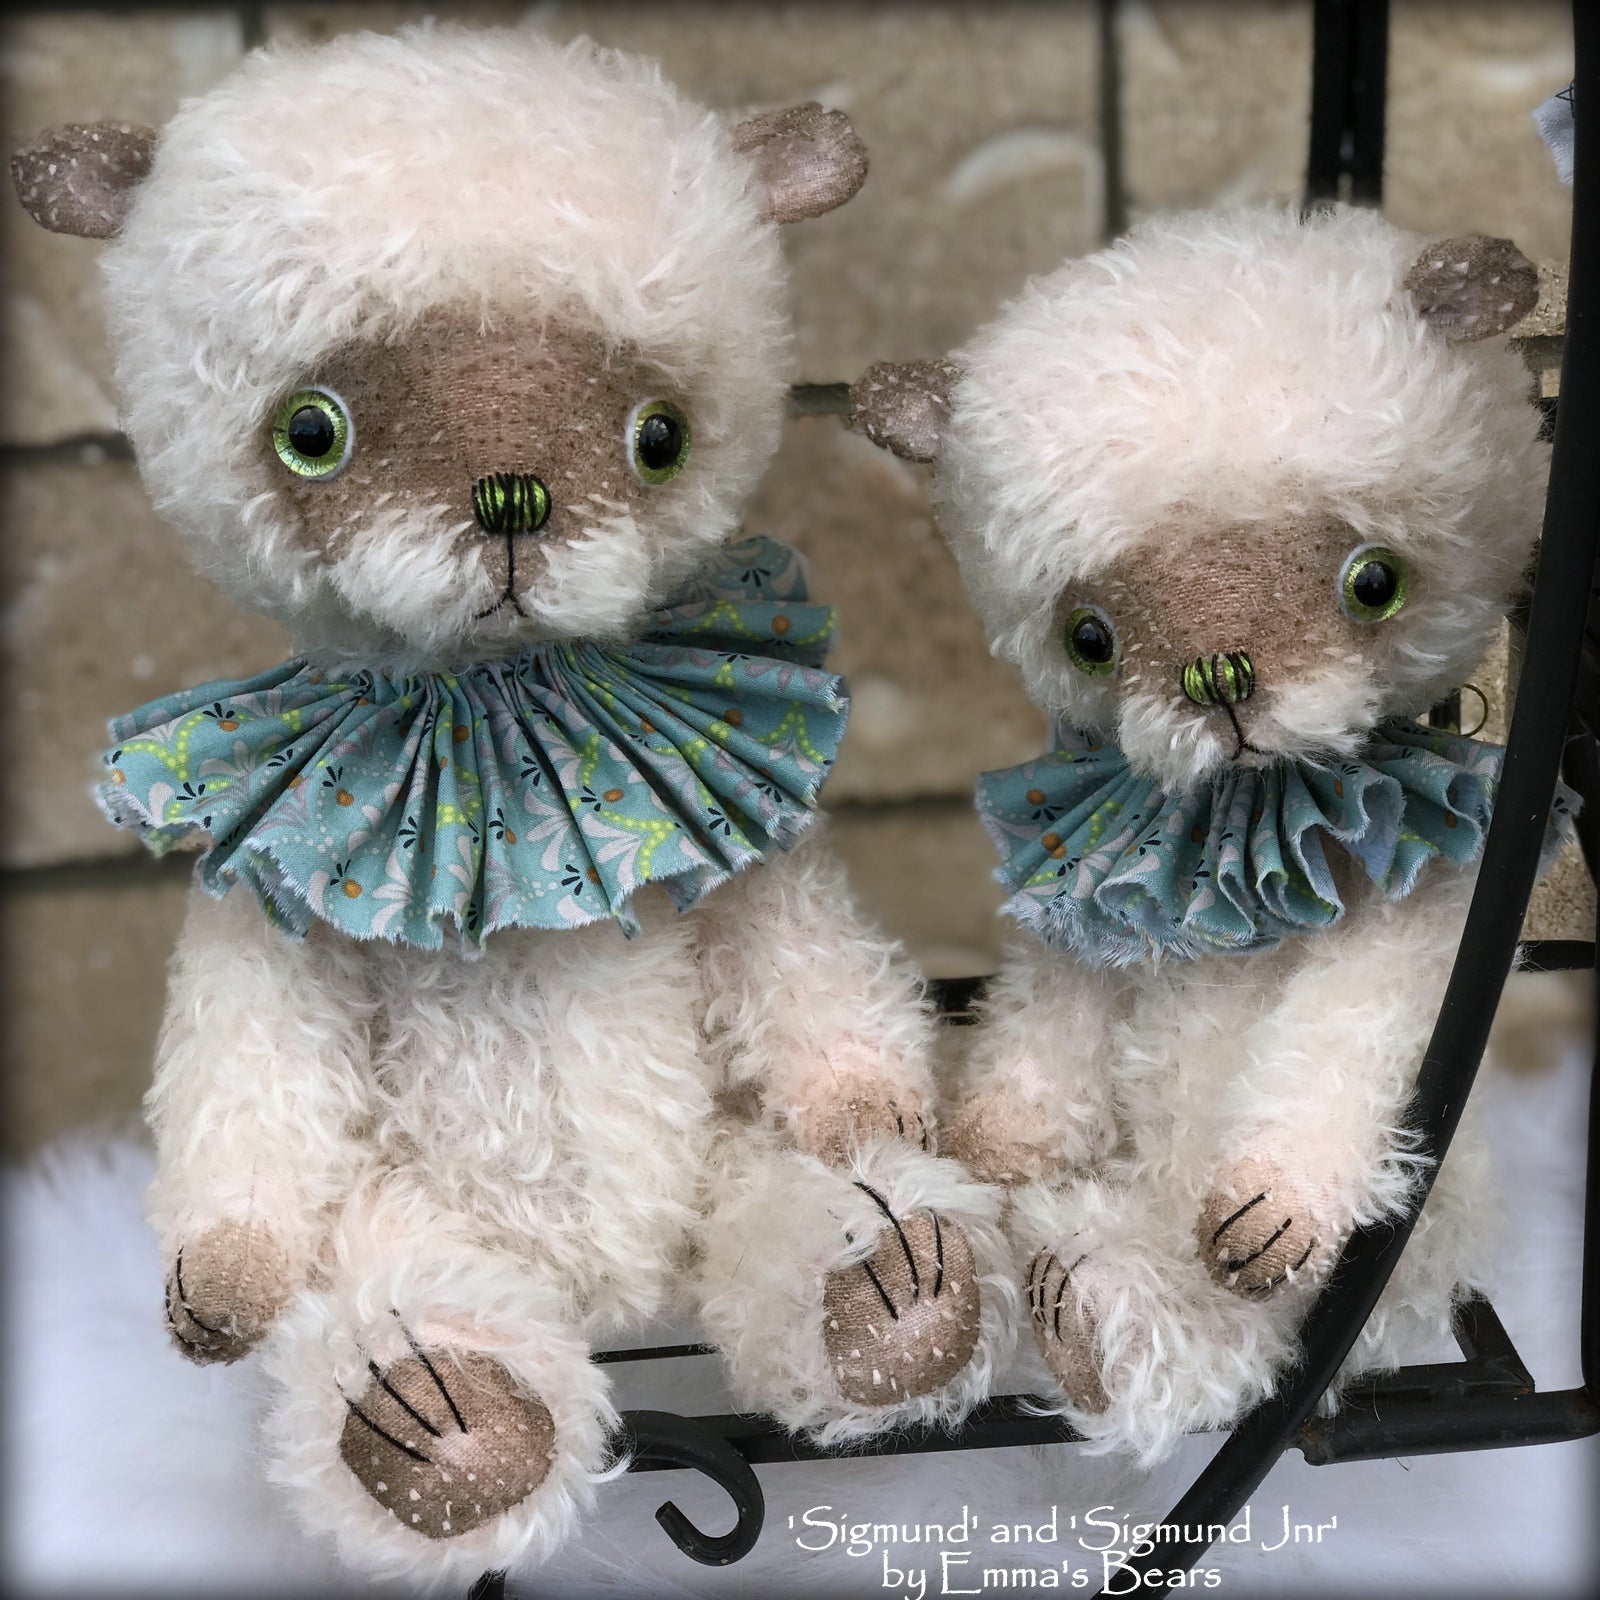 Sigmund Jnr - 11" hand-dyed double thick mohair Artist Bear by Emma's Bears - Limited Edition